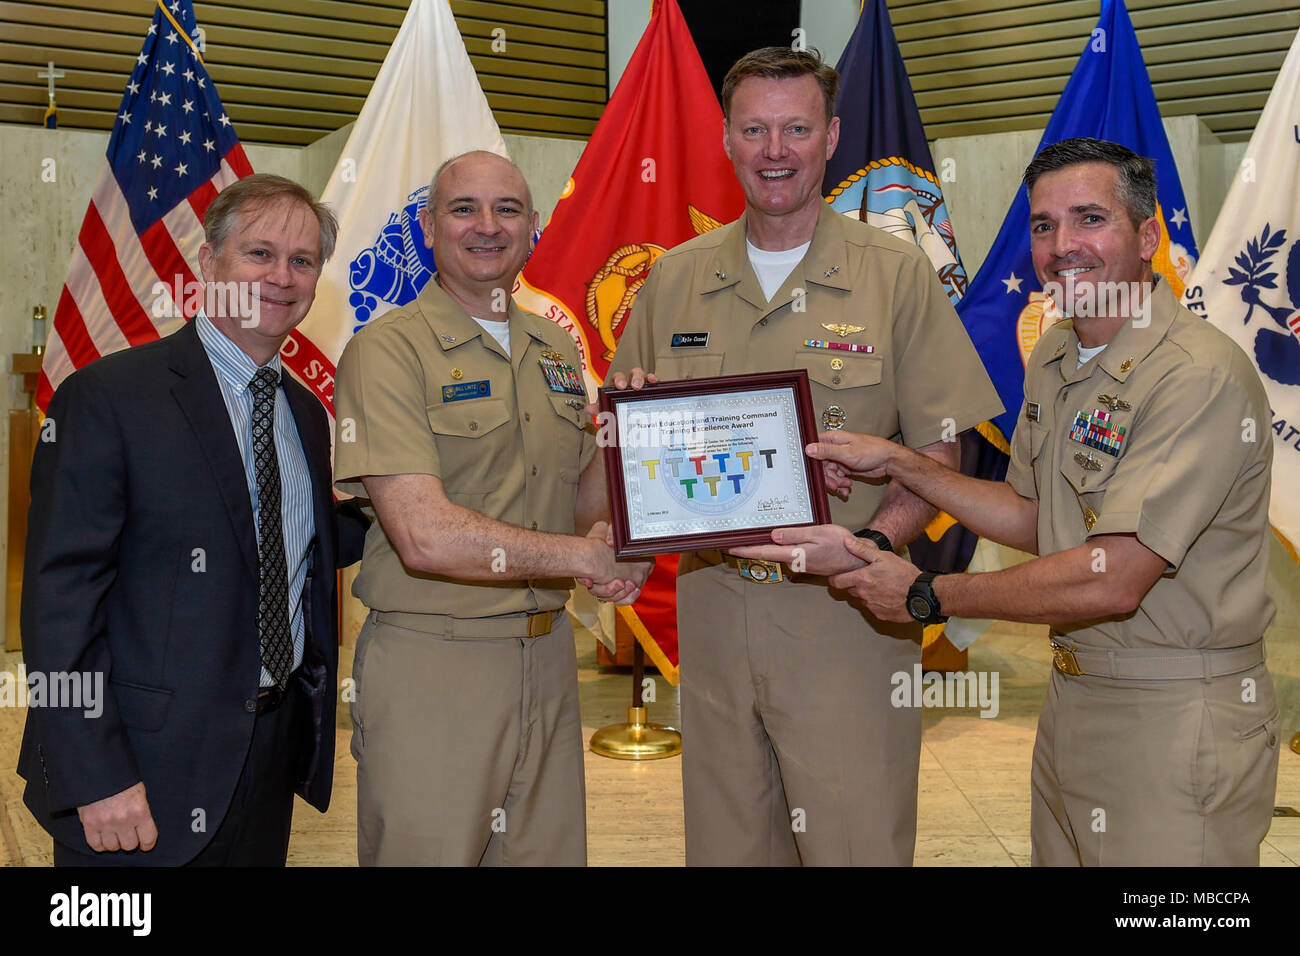 Fla. (Feb. 20, 2018) Rear Adm. Kyle Cozad (second from right), commander, Naval Education and Training Command (NETC), presents the 2017 NETC Training Excellence Award to Capt. Bill Lintz, commanding officer, Center for Information Warfare Training (CIWT). CIWT won the overall Training Excellence White 'T' award and all nine functional area awards. Also pictured are John Jones, NETC’s executive director (far left), and CIWT's Command Master Chief Mike Bates (far right). (U.S. Navy Stock Photo